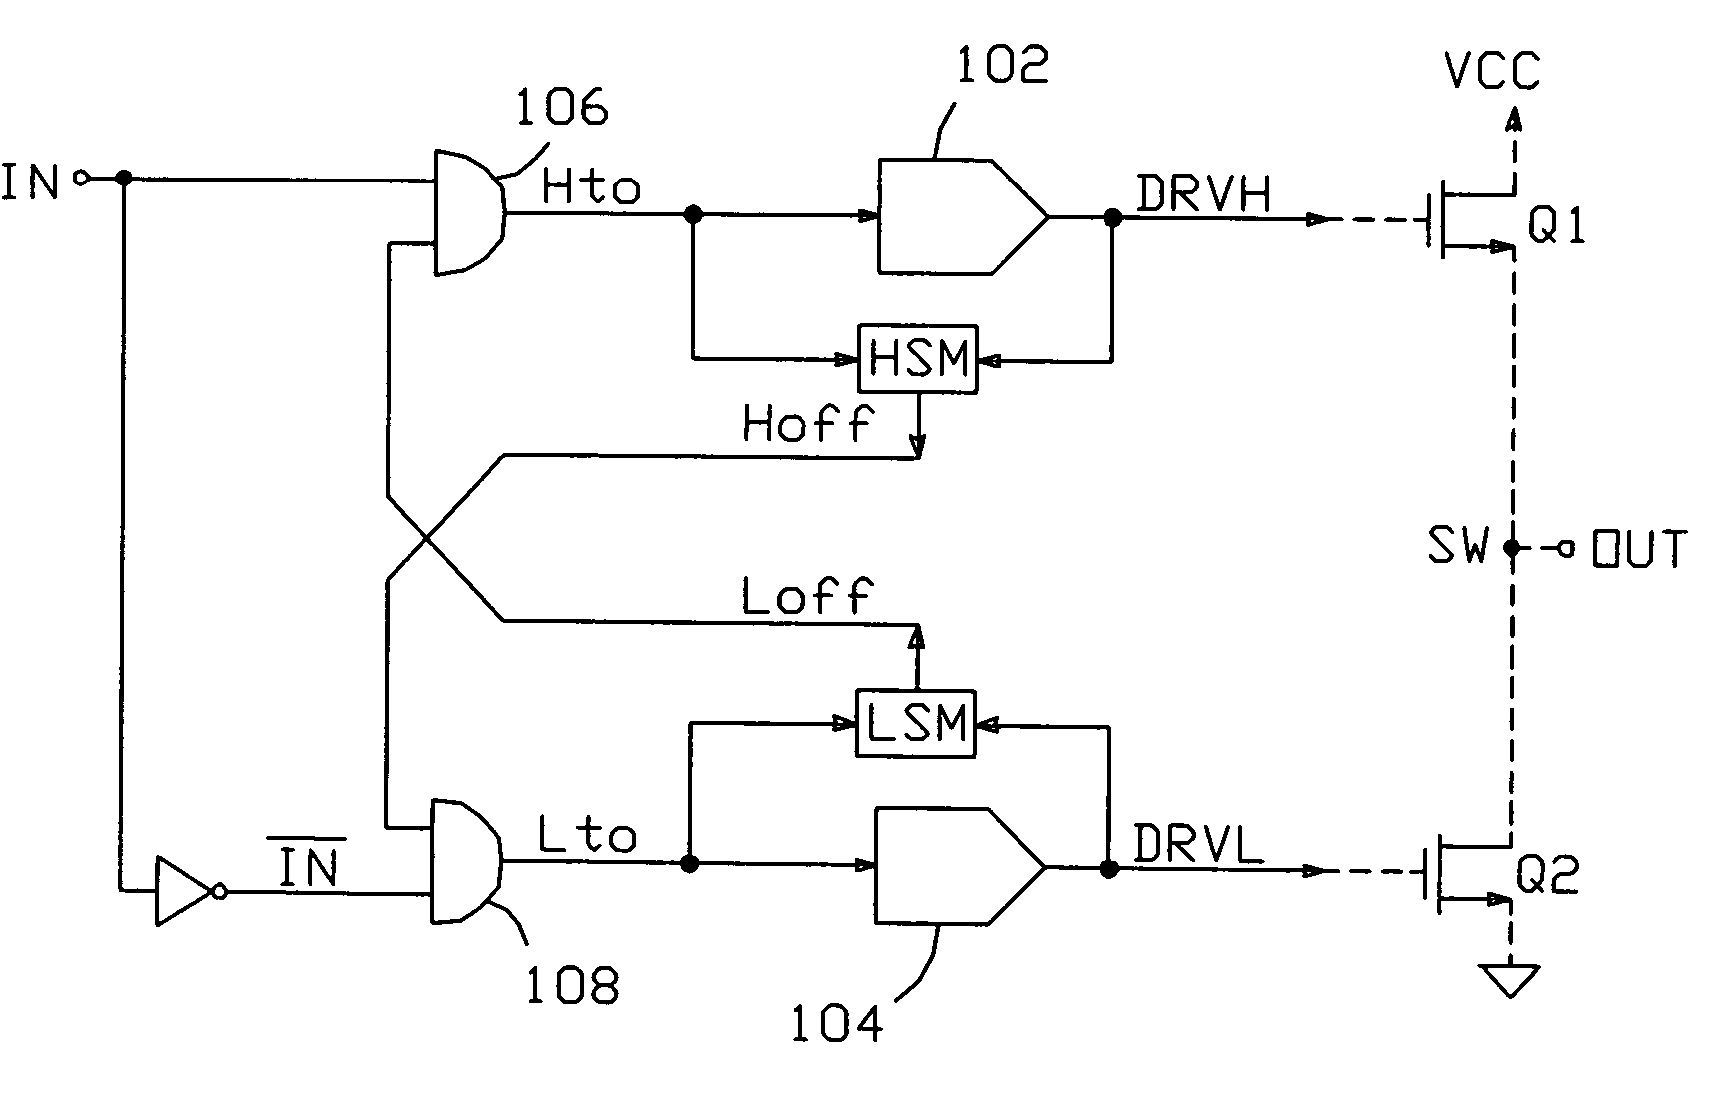 Anti-cross conduction drive control circuit and method